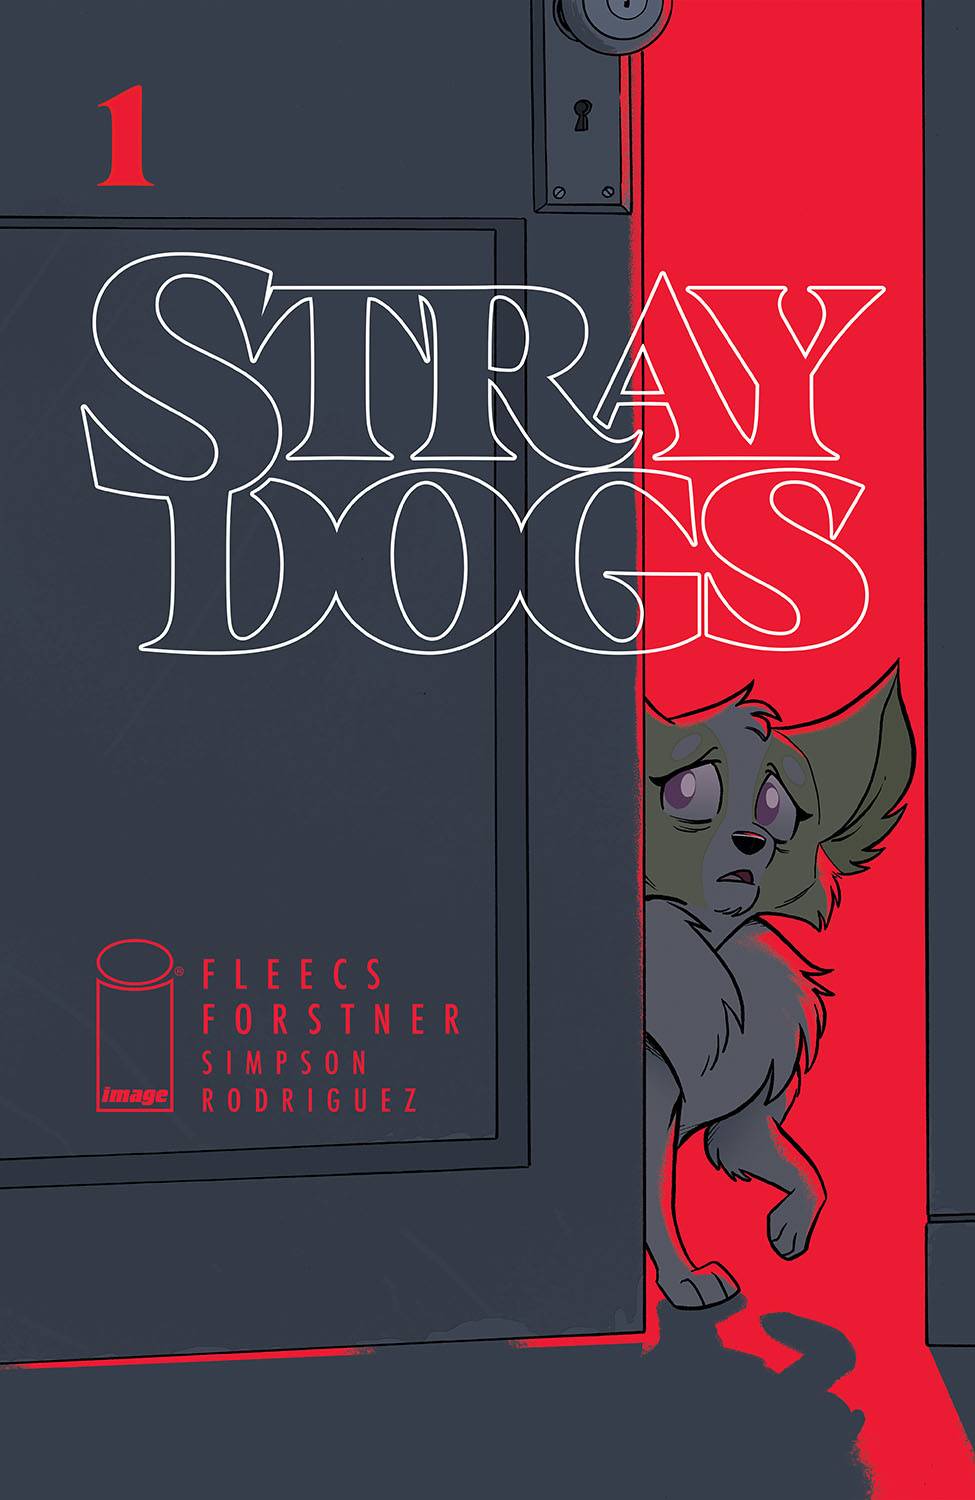 A cute, wide-eyed small dog peeks from behind a door with a look of worry on its face. Cover art for Stray Dogs #1 by Trish Forstner.